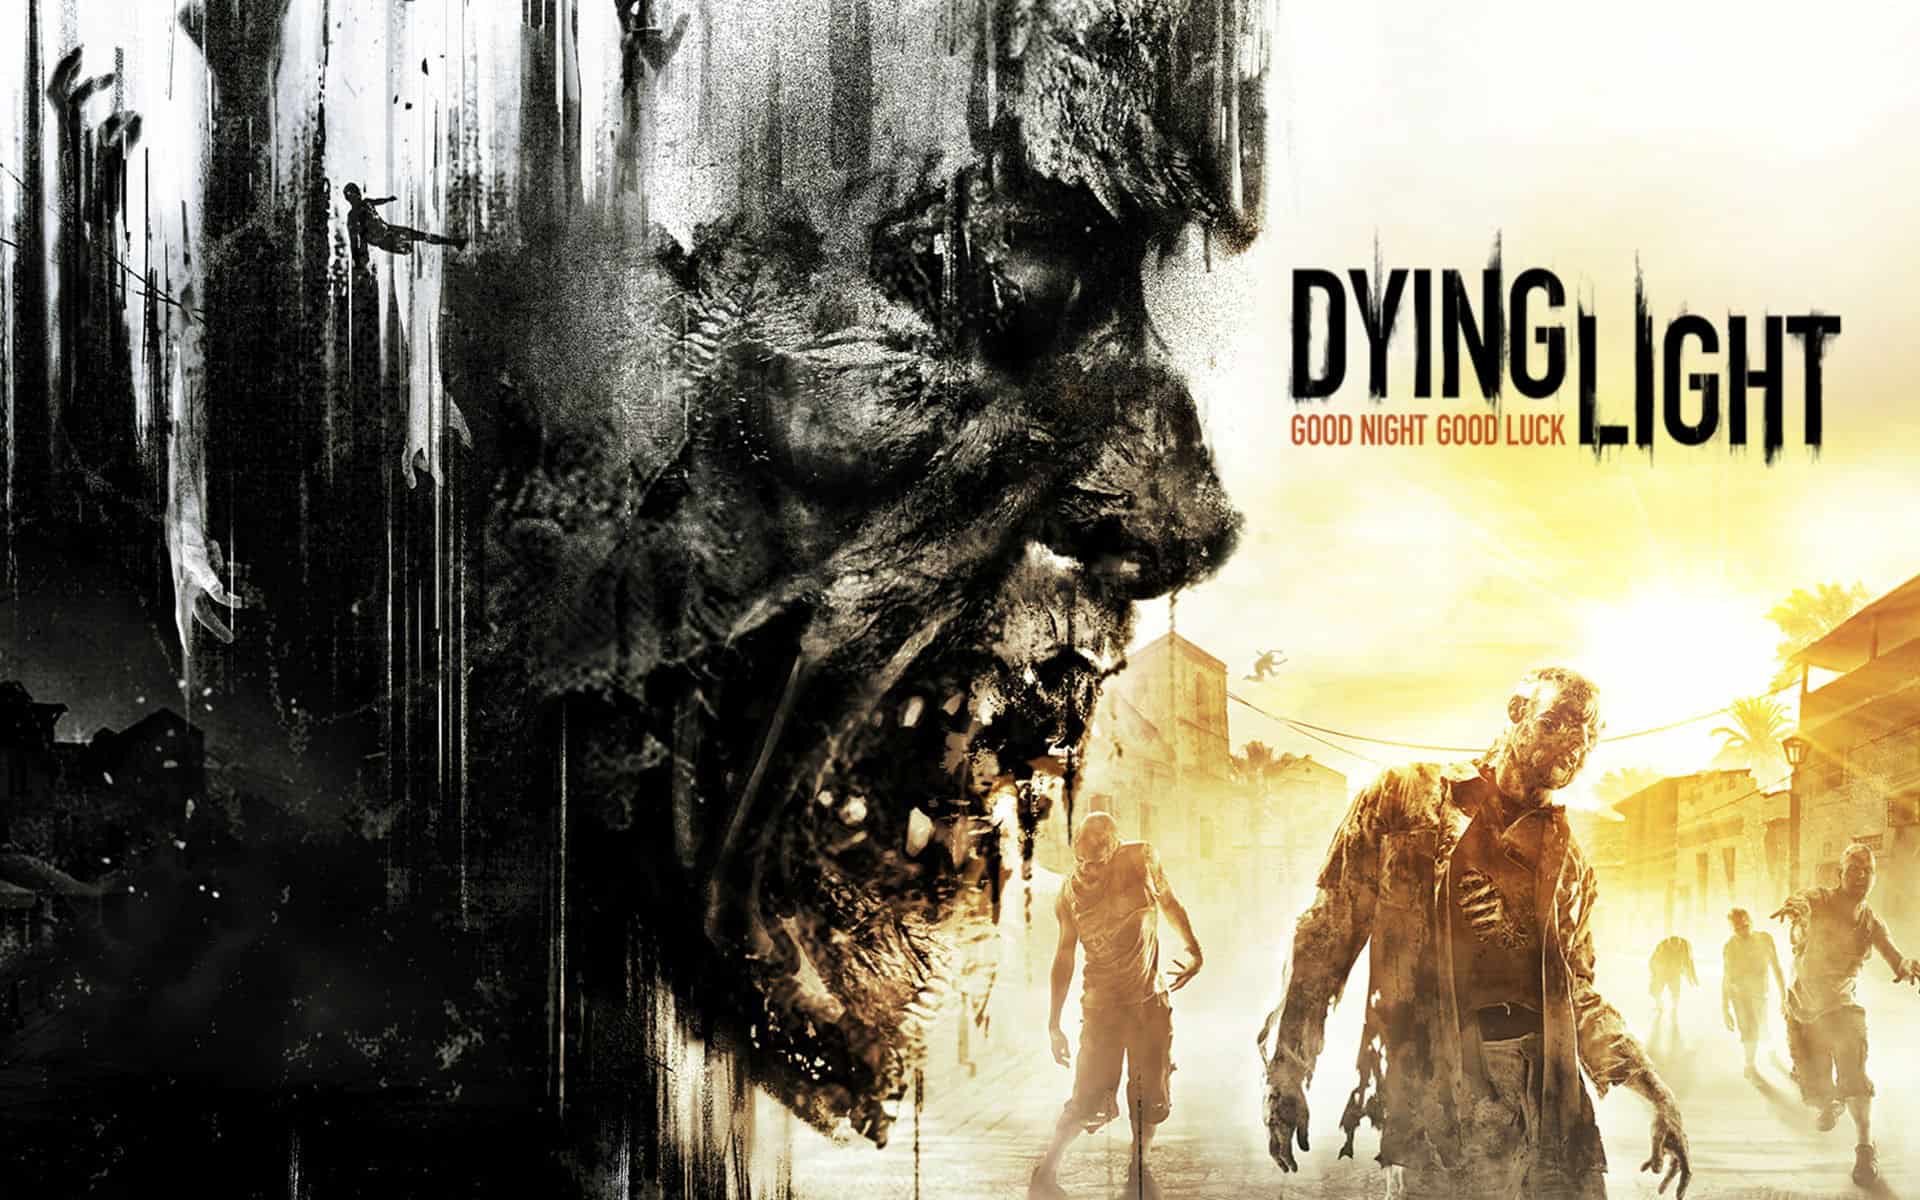 Dying Light: Enhanced Edition is now available for free on PC - OC3D